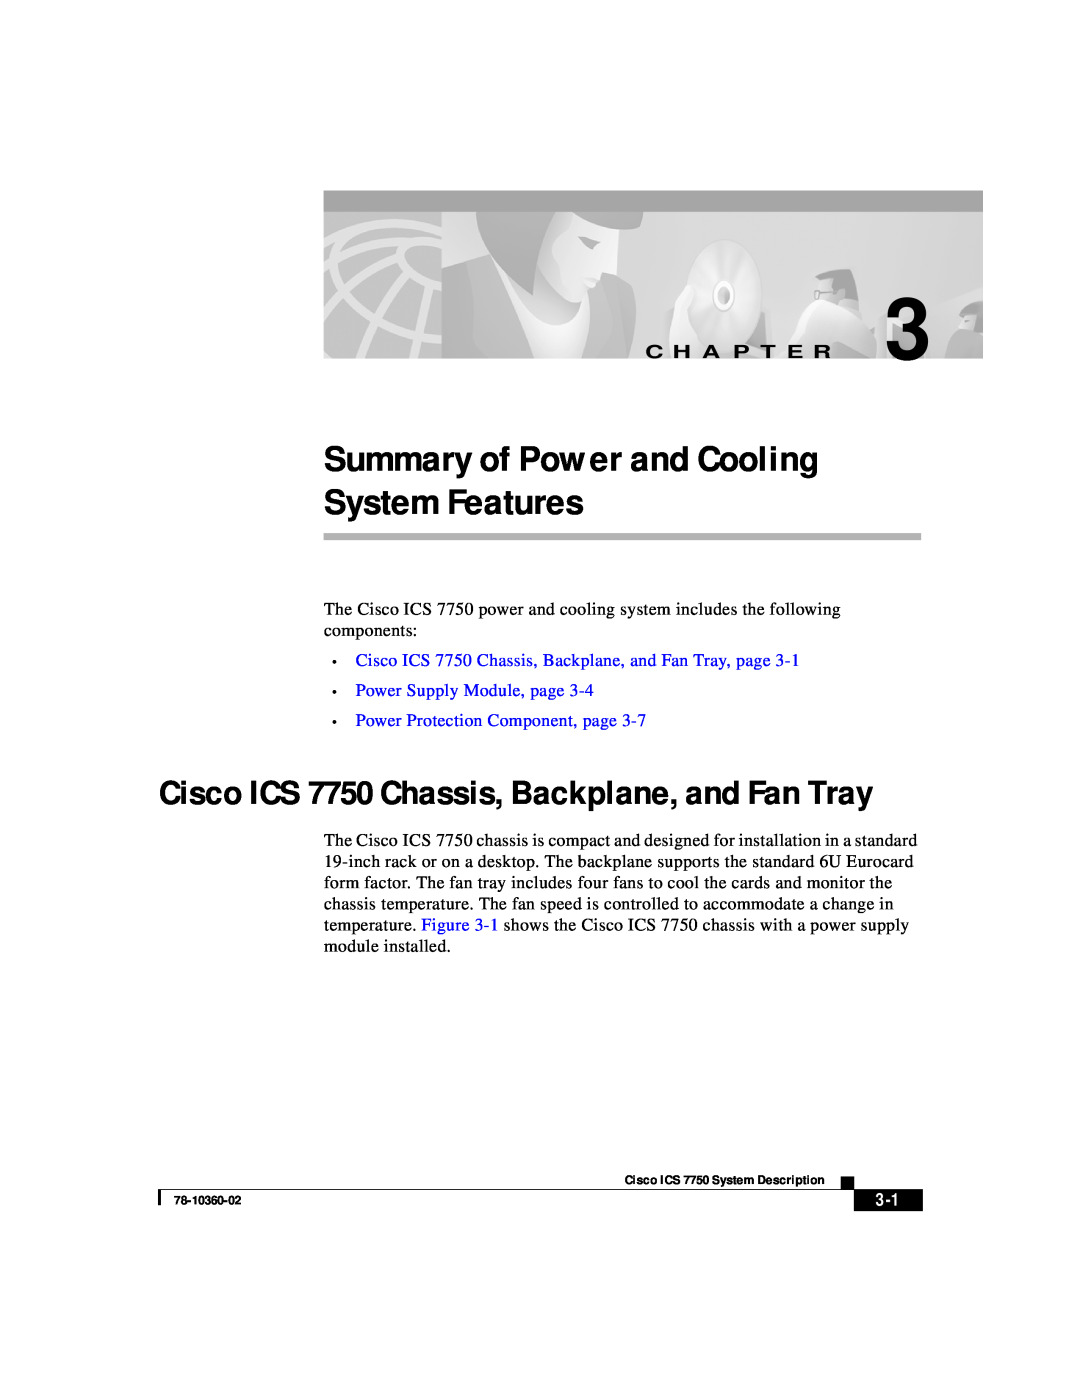 Cisco Systems ICS-7750 manual Summary of Power and Cooling System Features, Cisco ICS 7750 Chassis, Backplane, and Fan Tray 